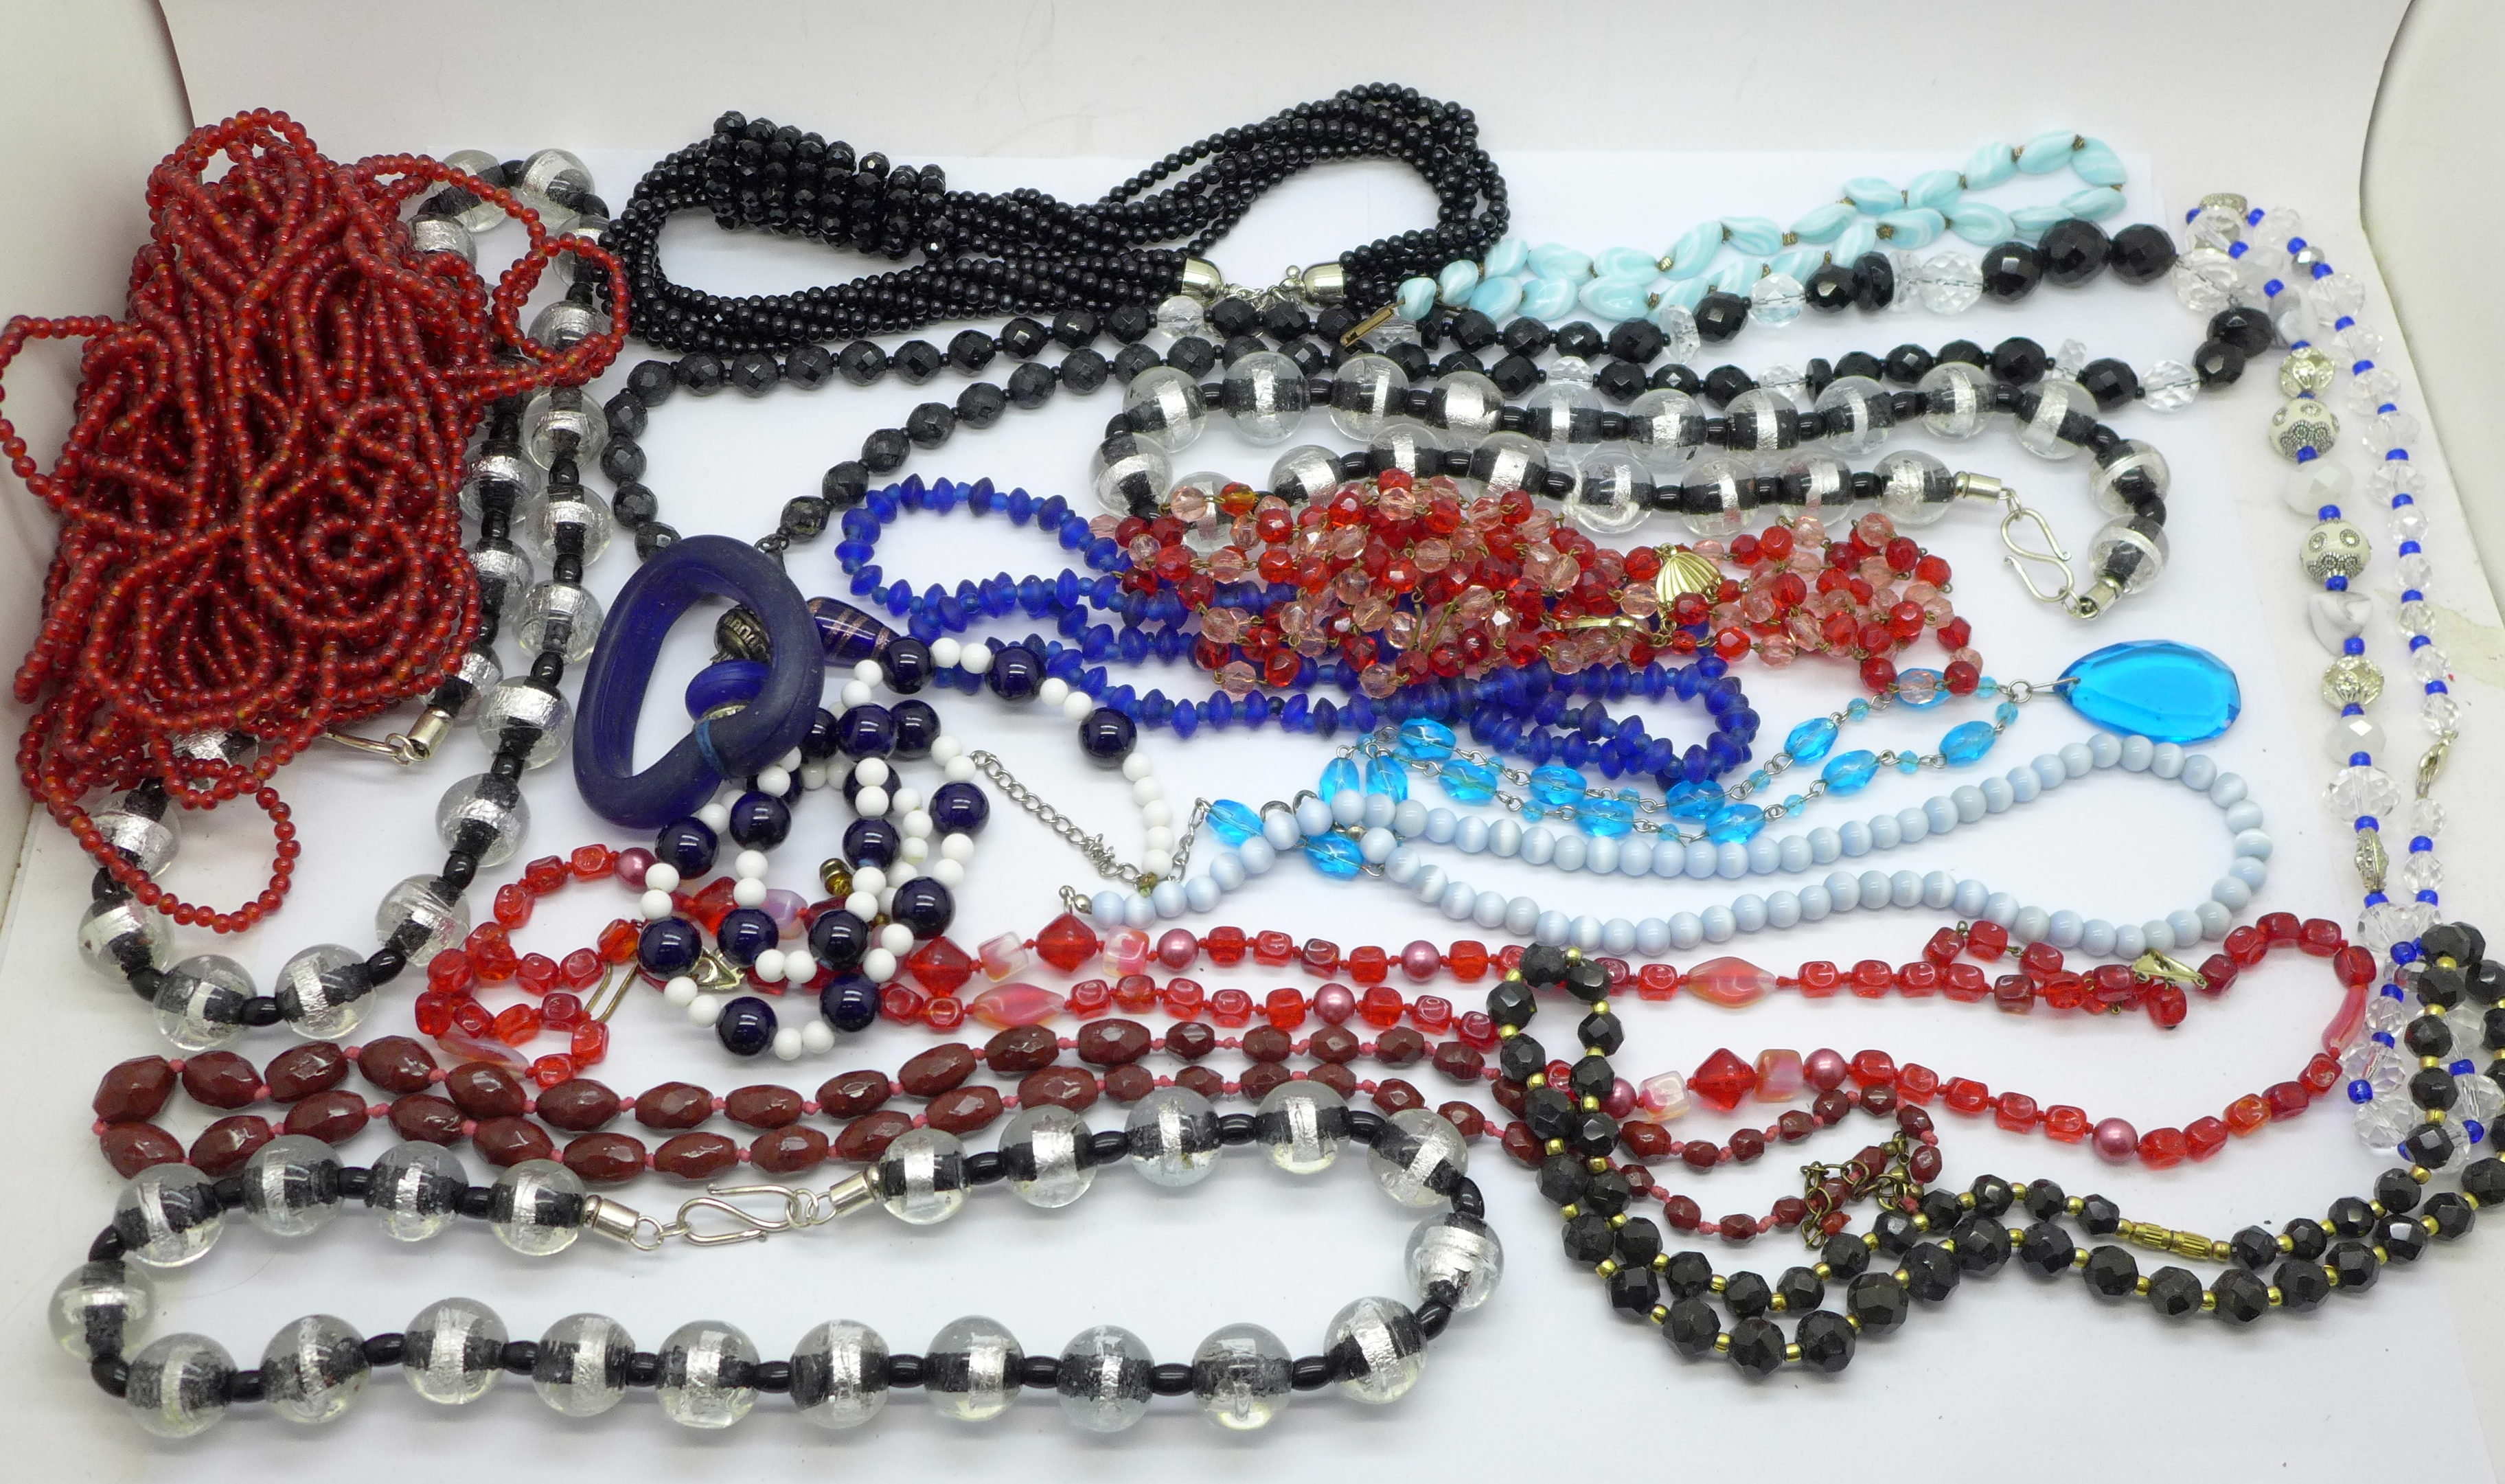 Glass bead necklaces and bracelets